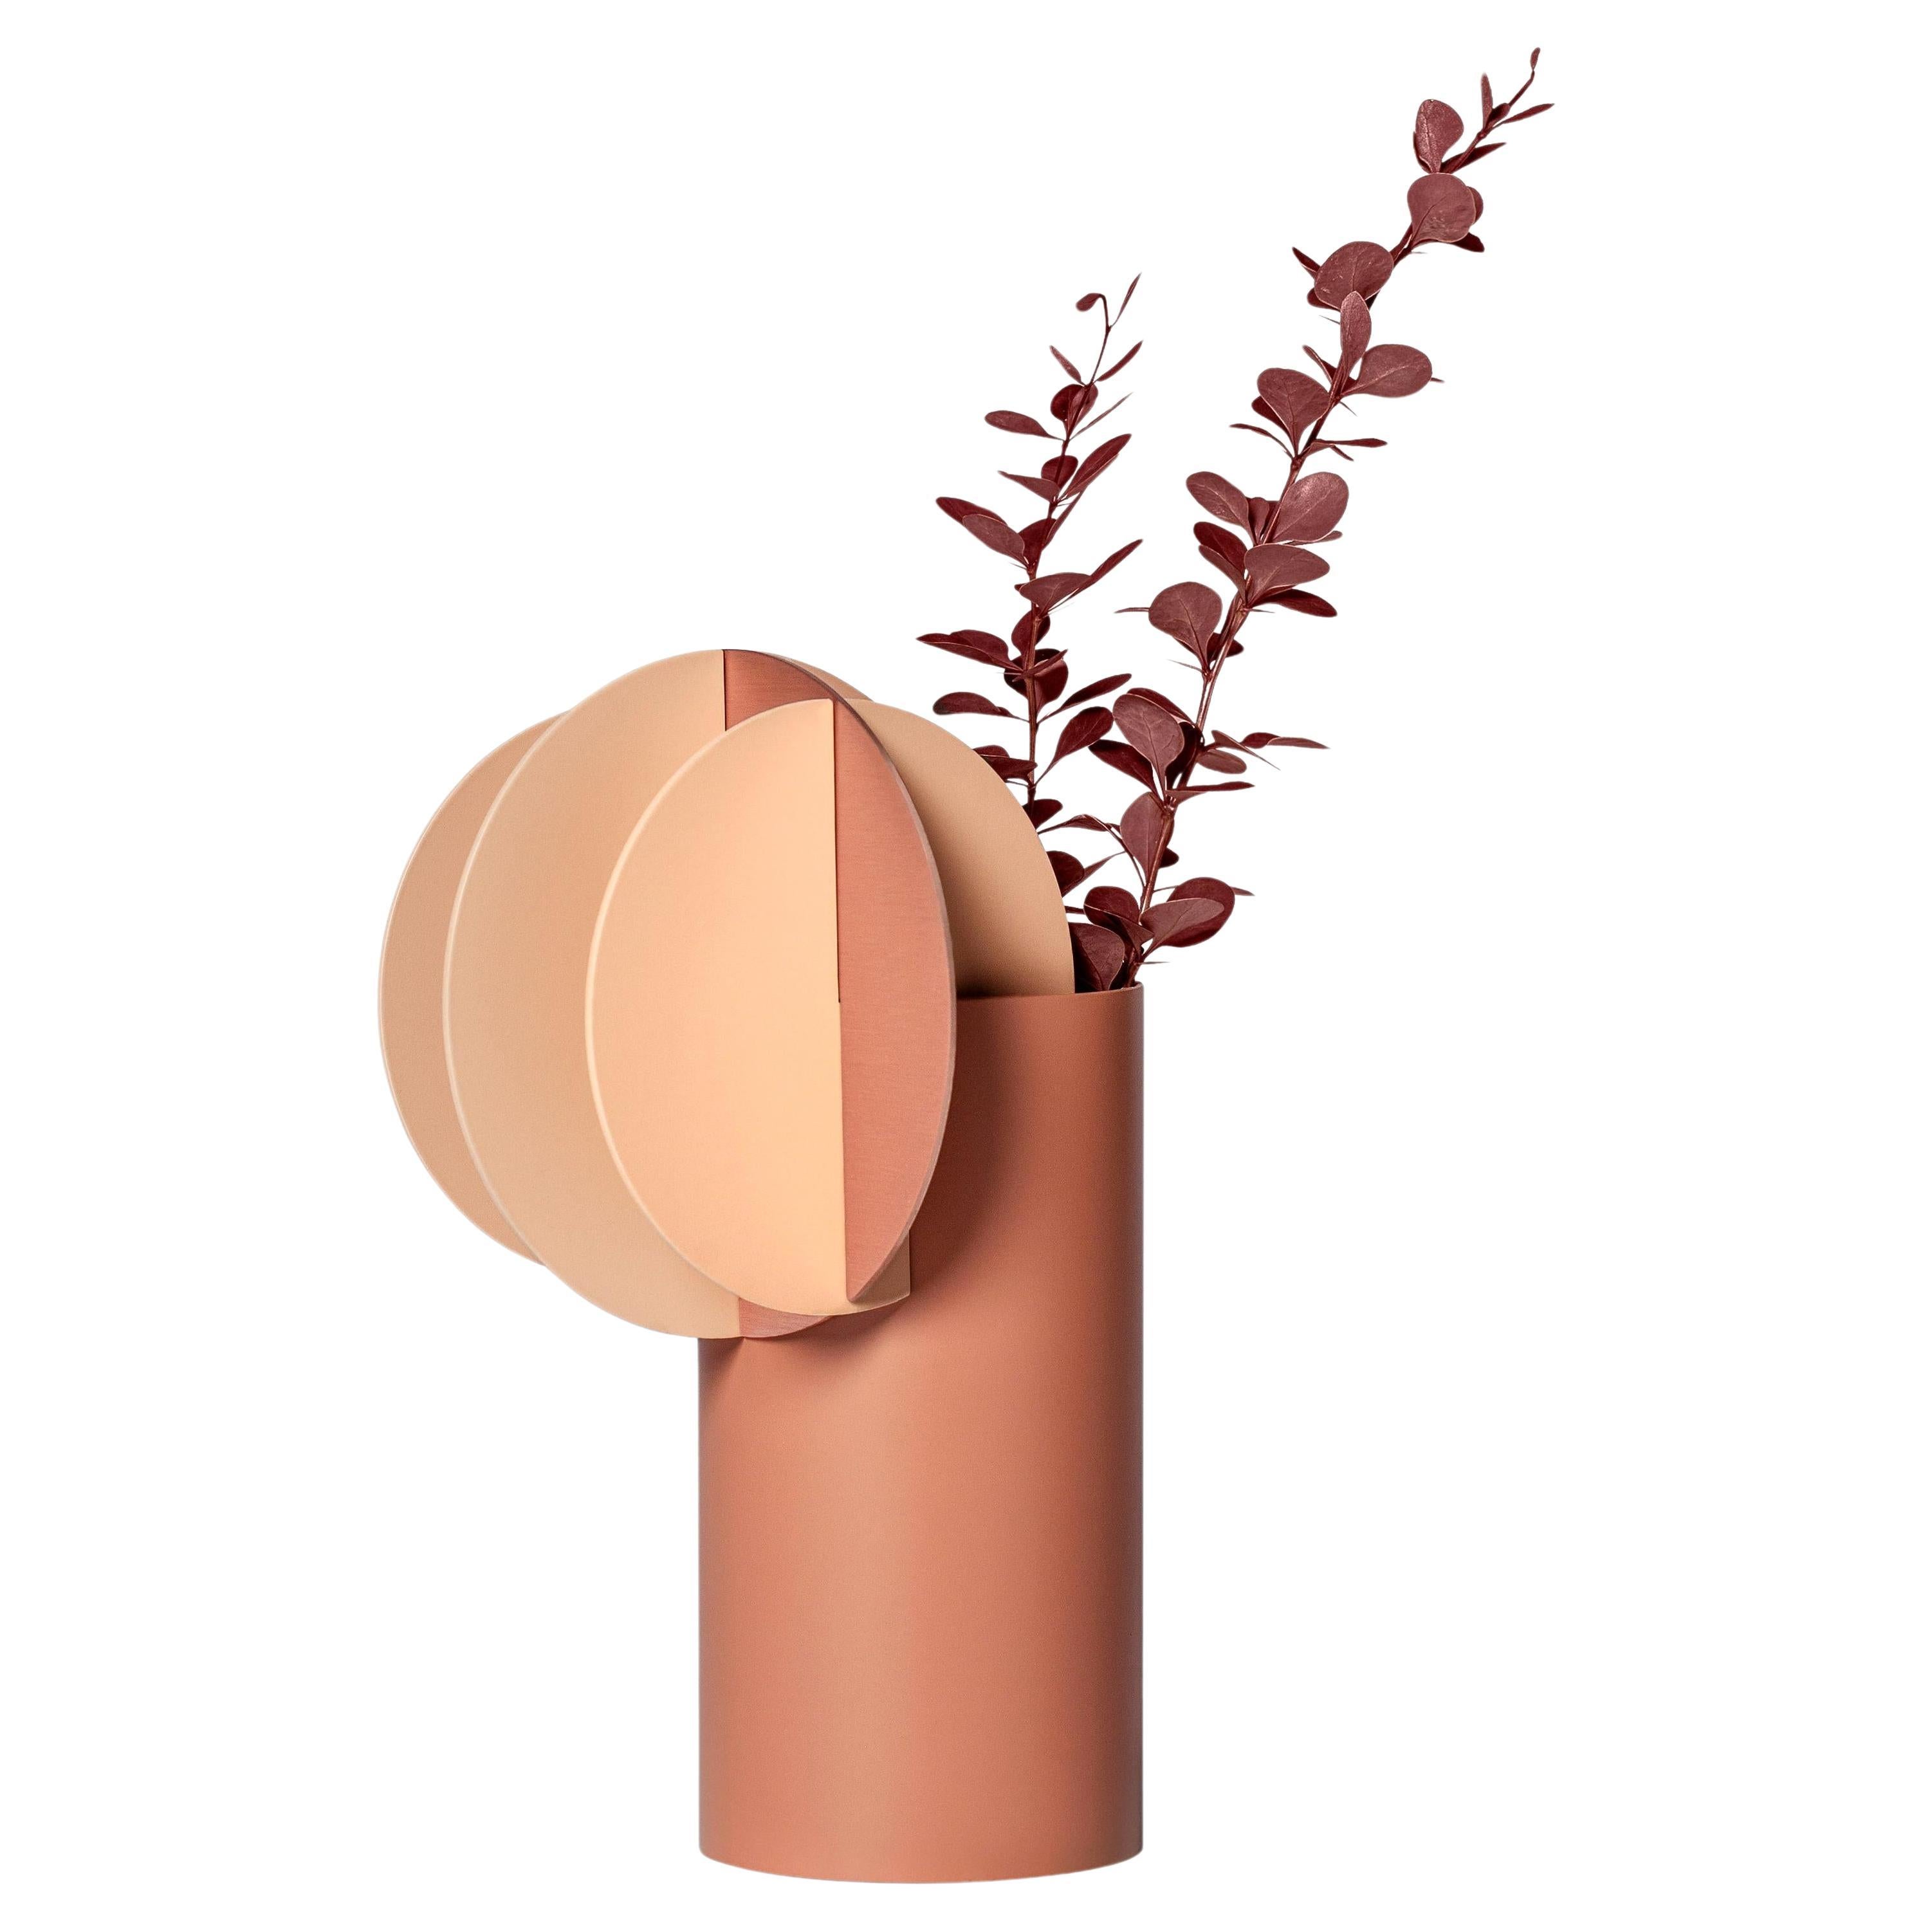 Contemporary Vase 'Delaunay CS7' by Noom, Copper and Steel